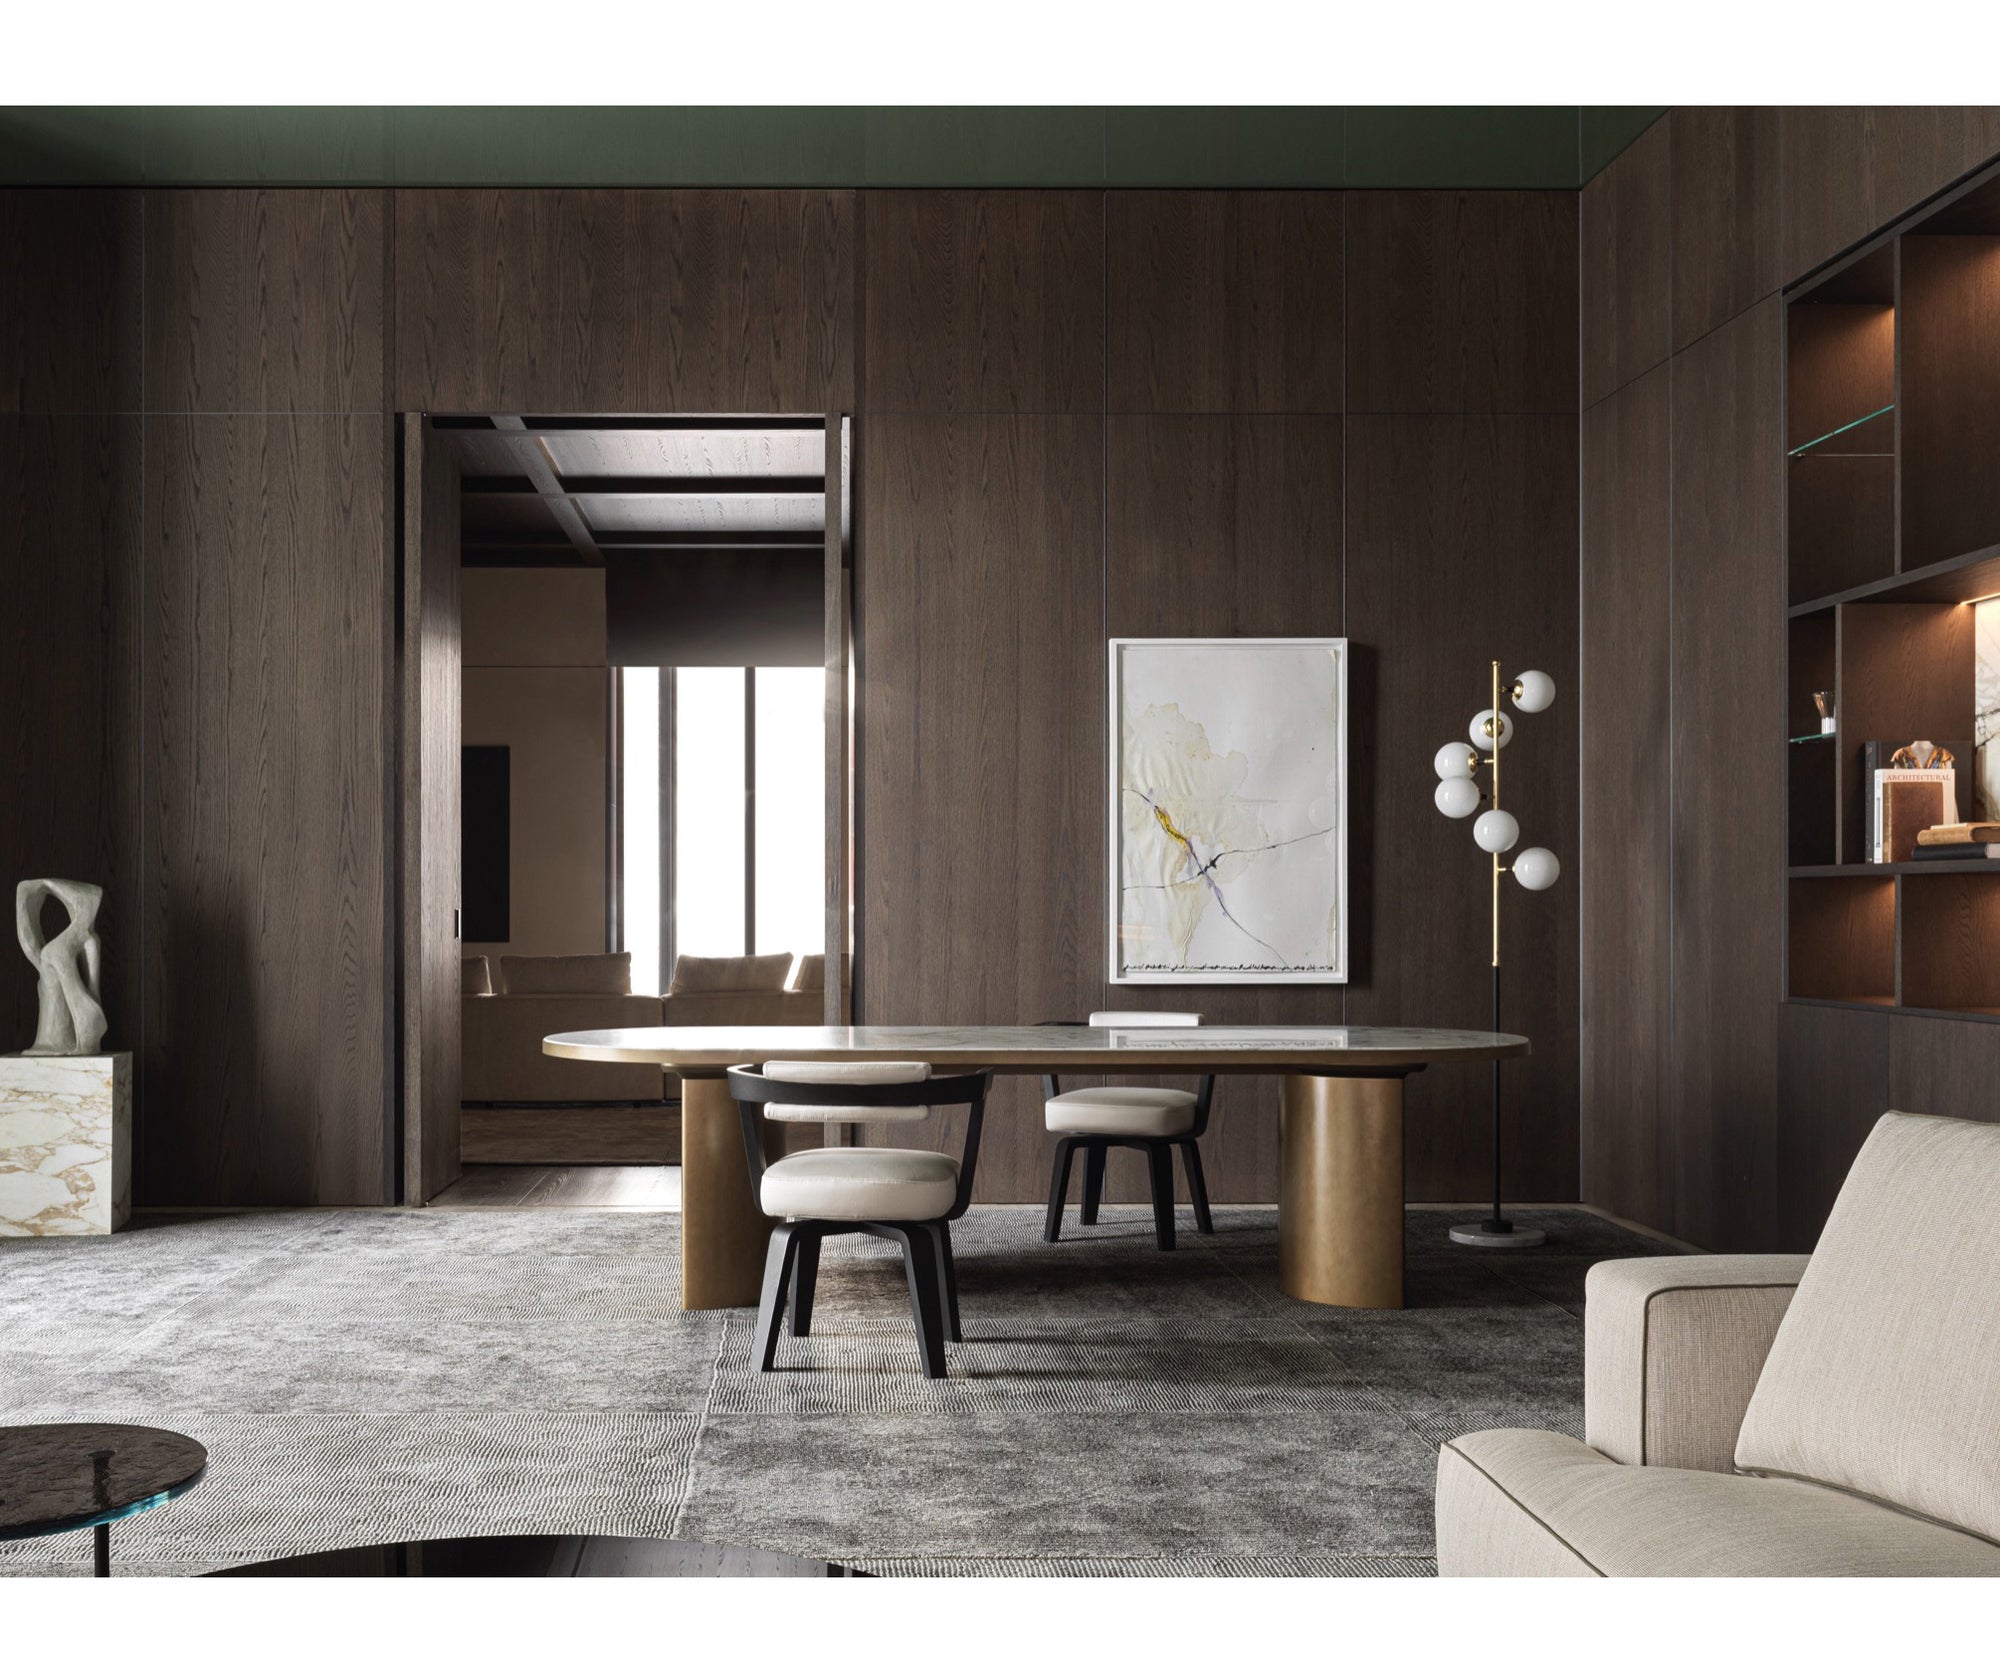 Arial Boiserie and Door System Molteni&C